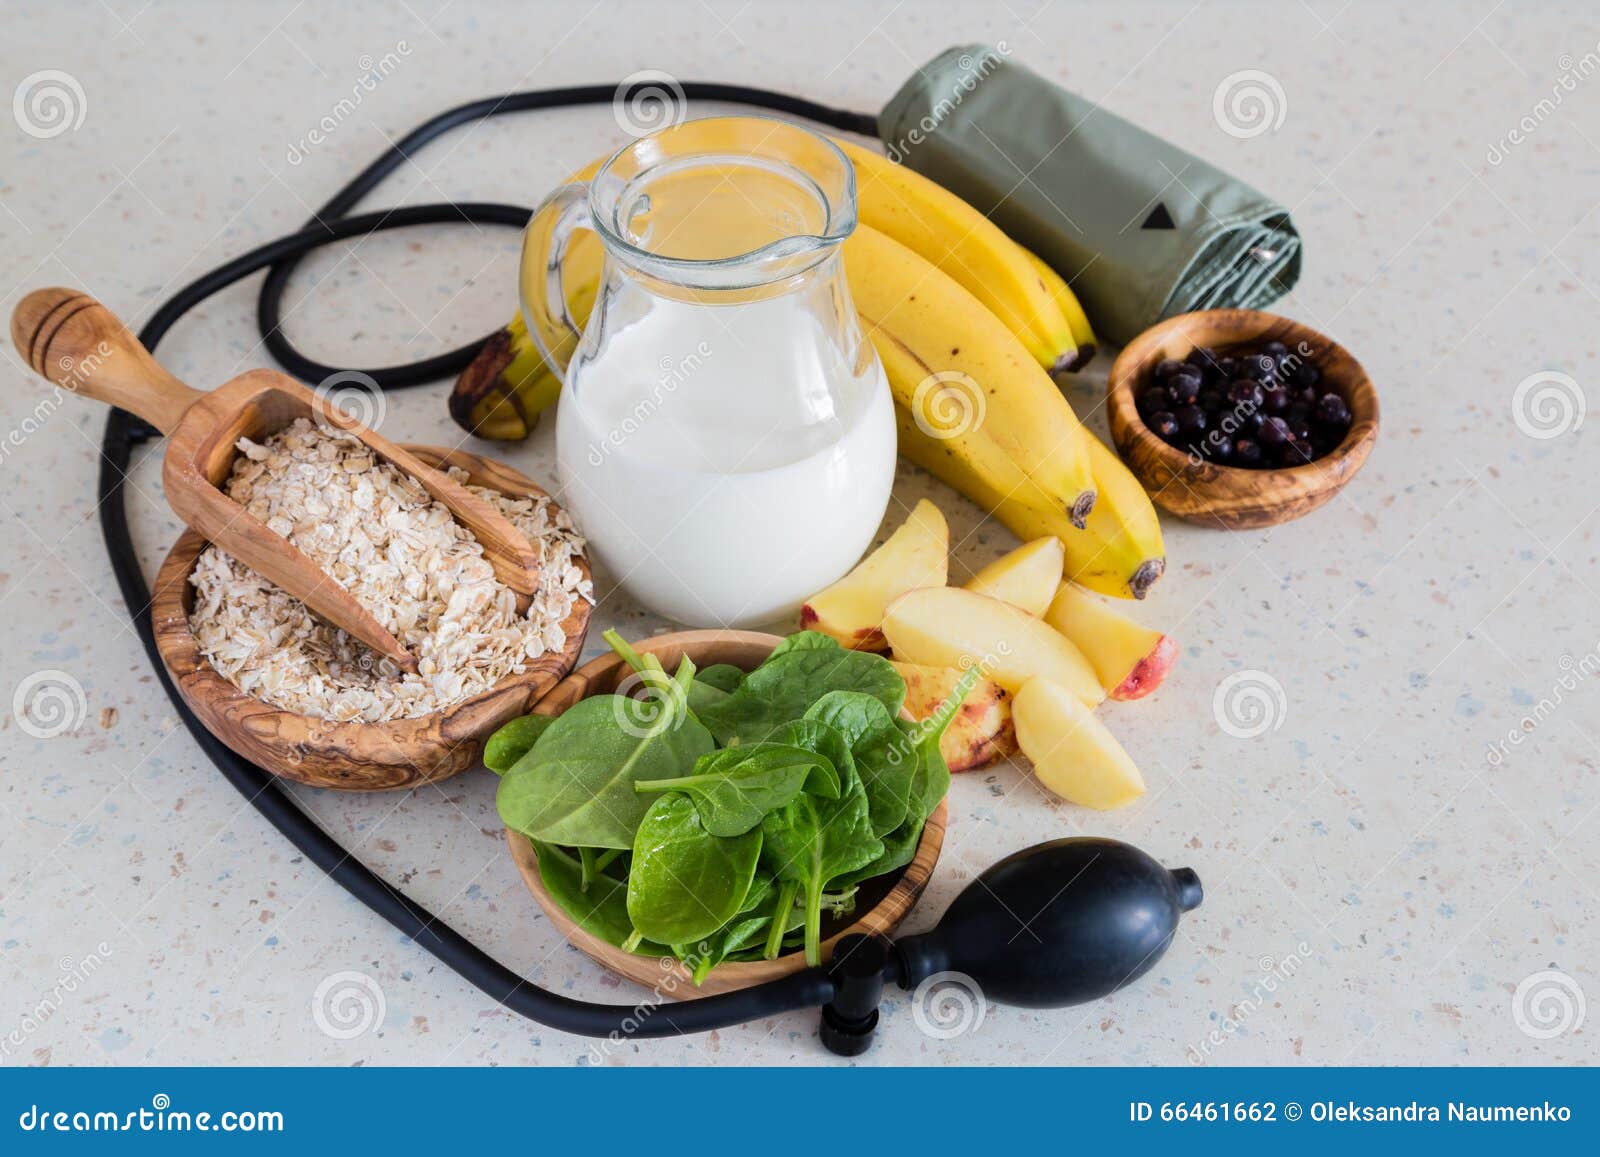 selection of food that is good fot hypertension